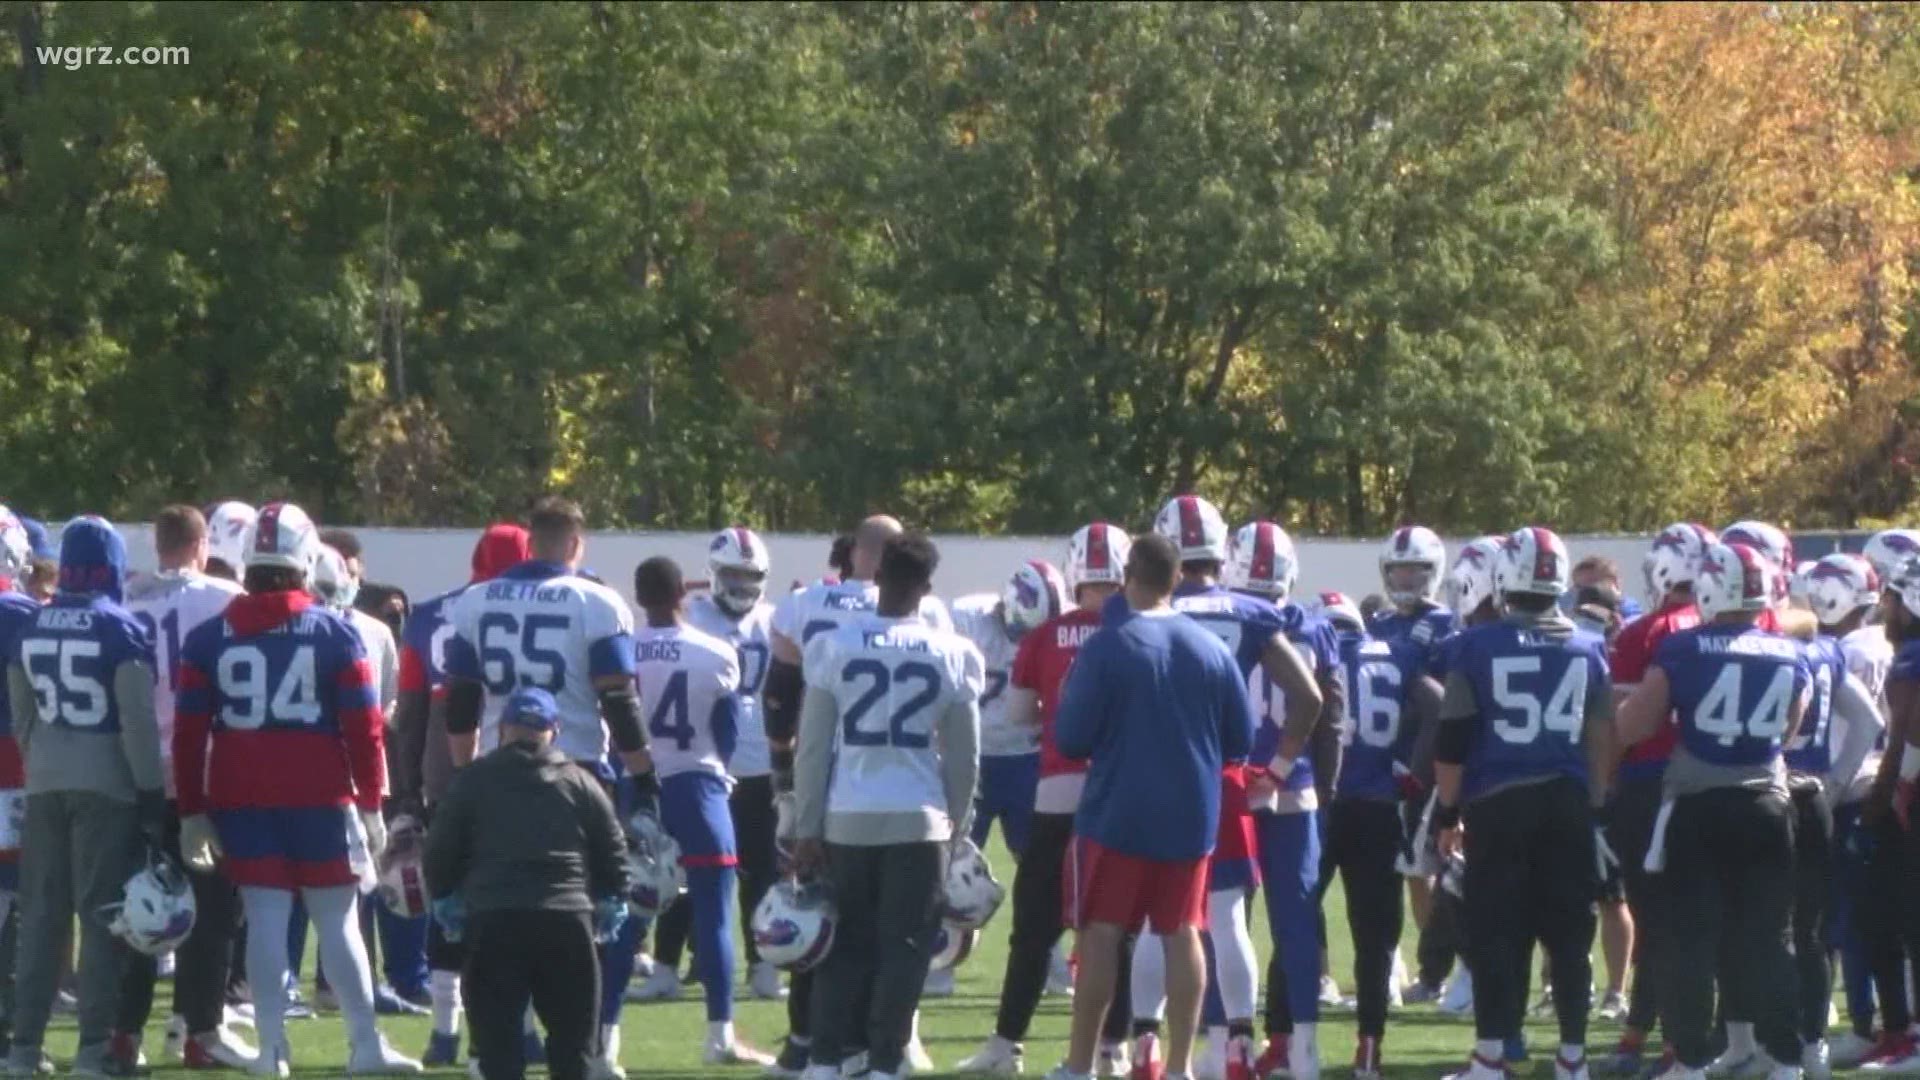 Bills players react to positive Titans cases